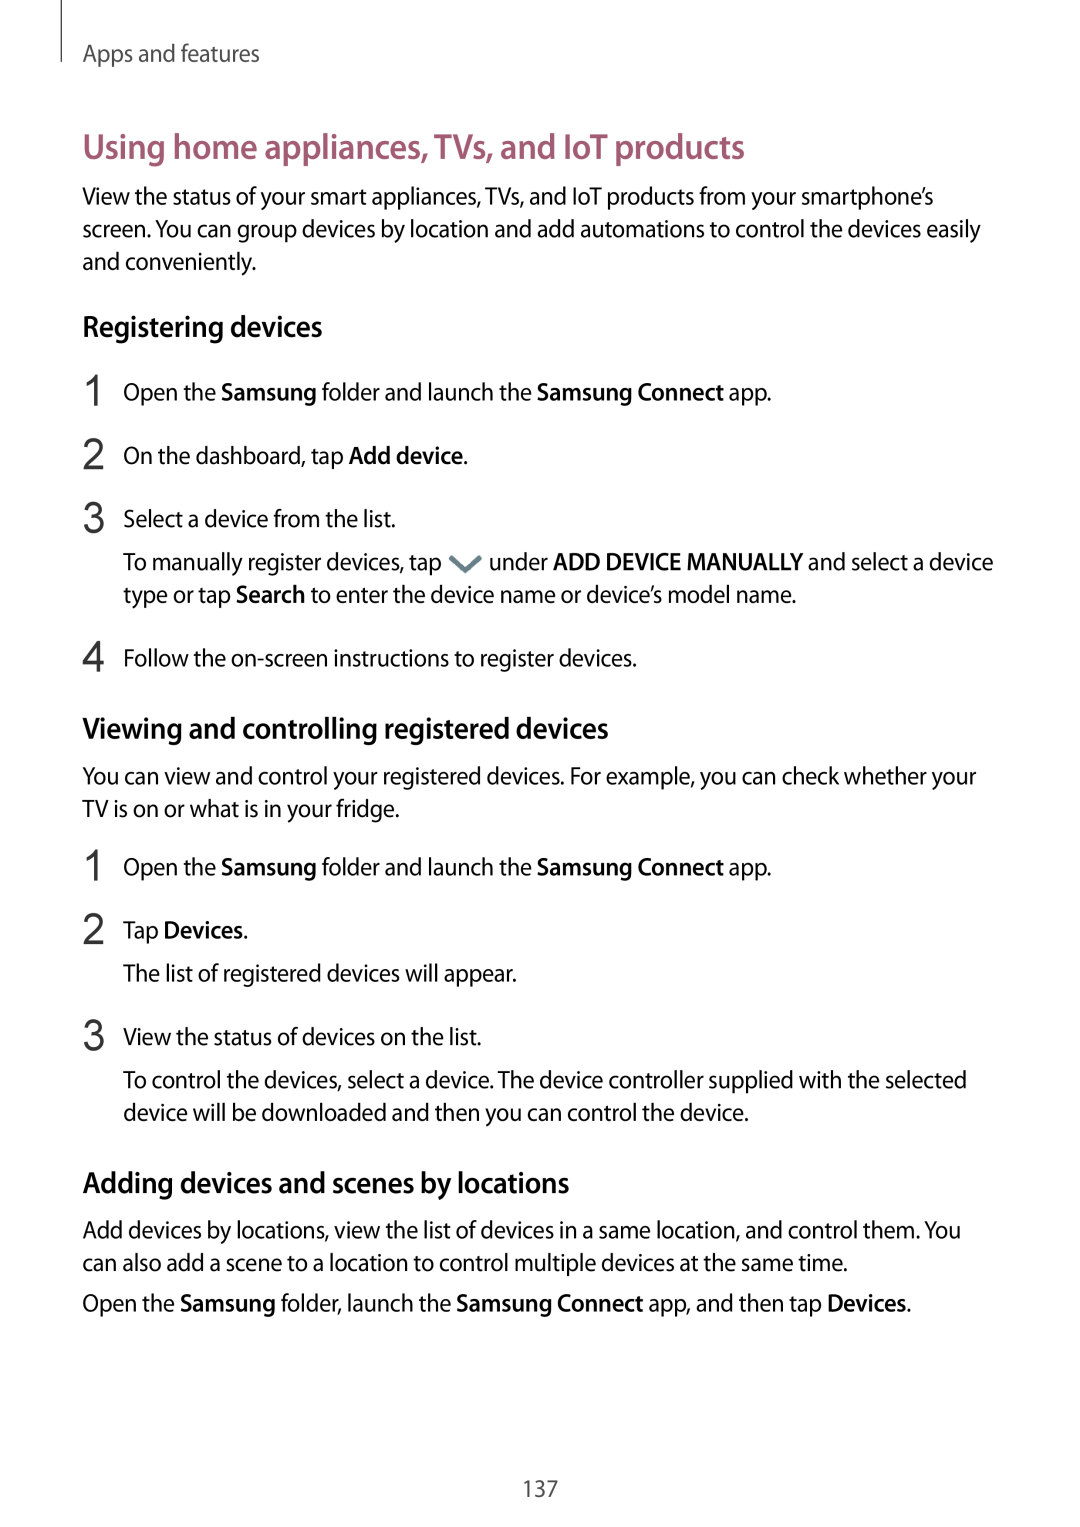 Samsung SM-A530FZKAOMN Using home appliances, TVs, and IoT products, Registering devices, Tap Devices, Apps and features 